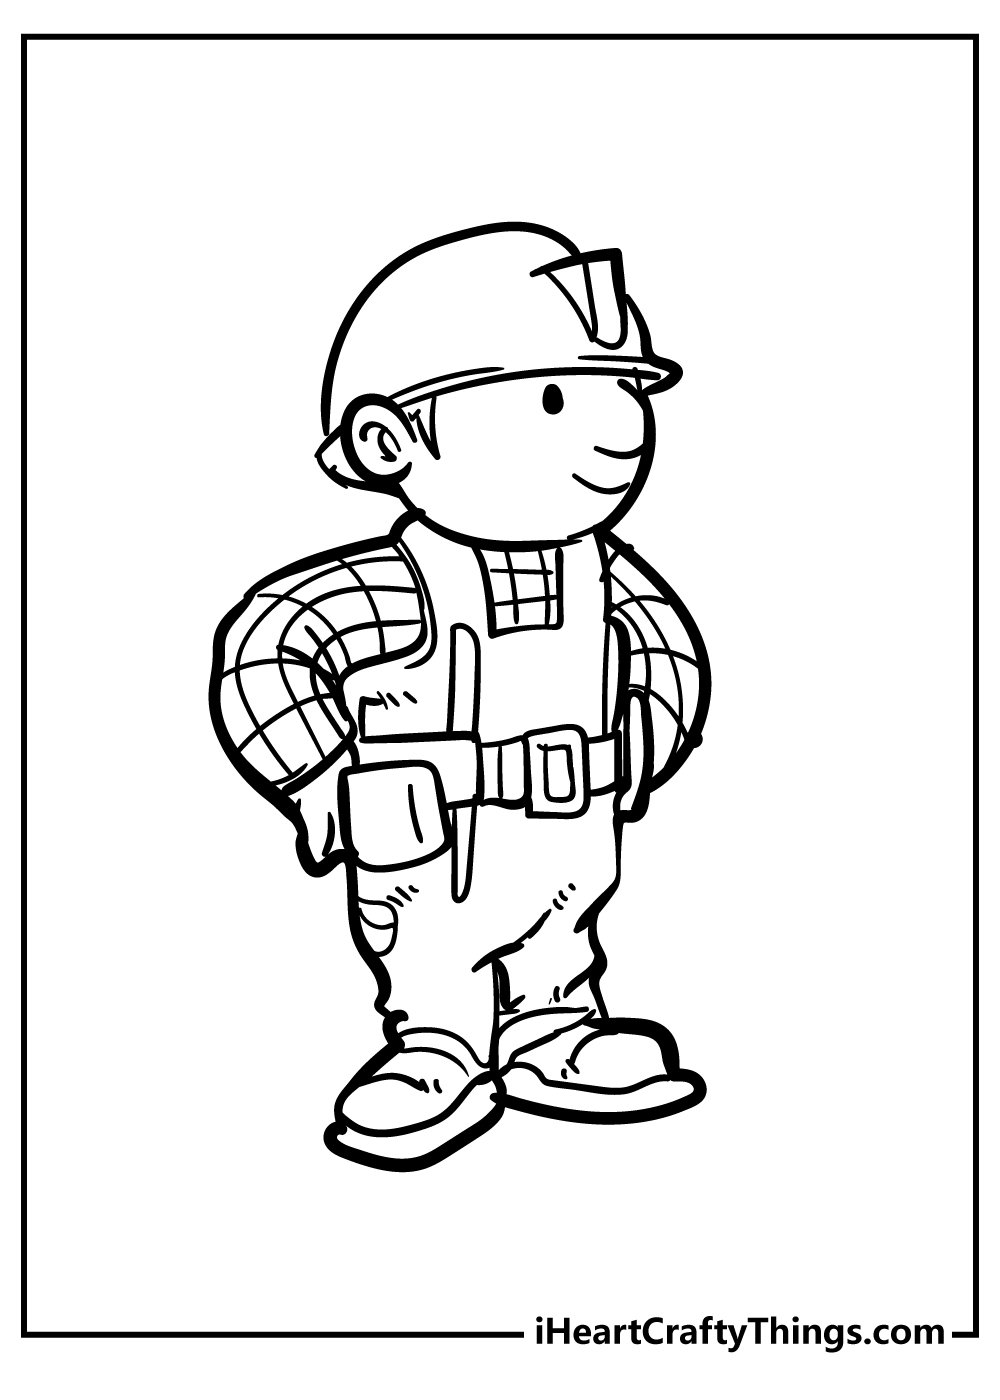 Bob the Builder Easy Coloring Pages